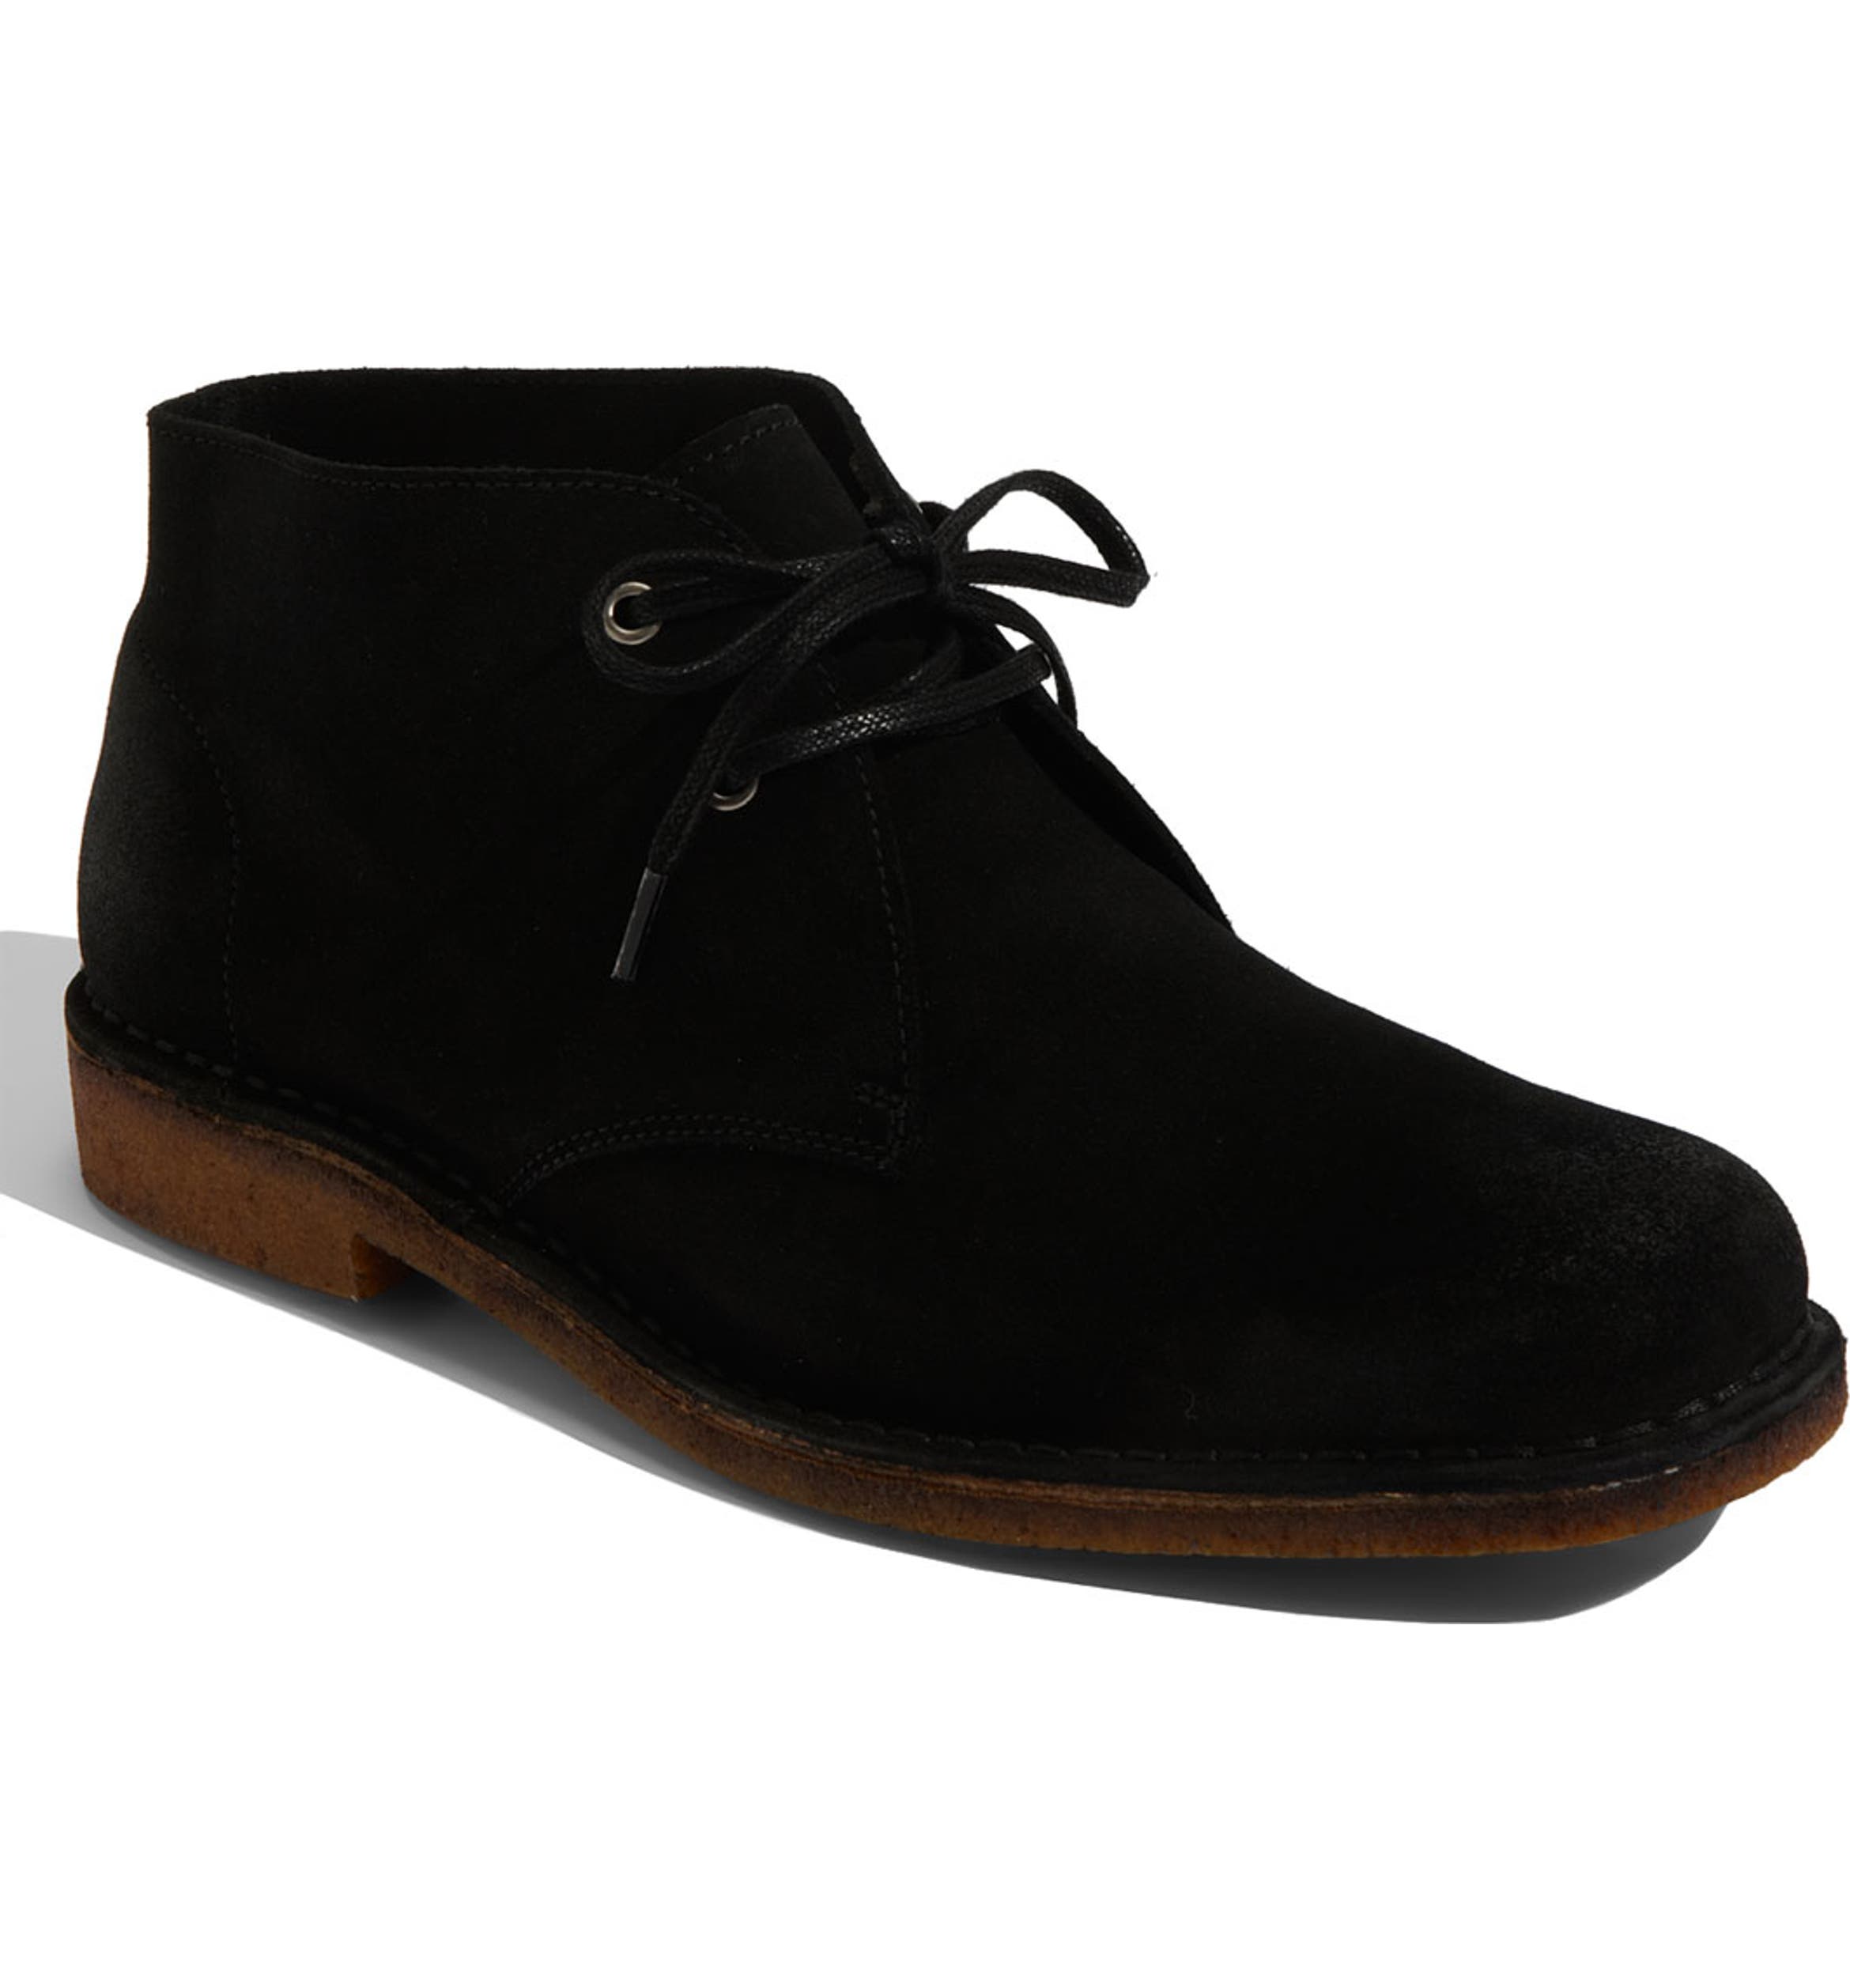 Hush Puppies® 'Norco' Suede Boot | Nordstrom